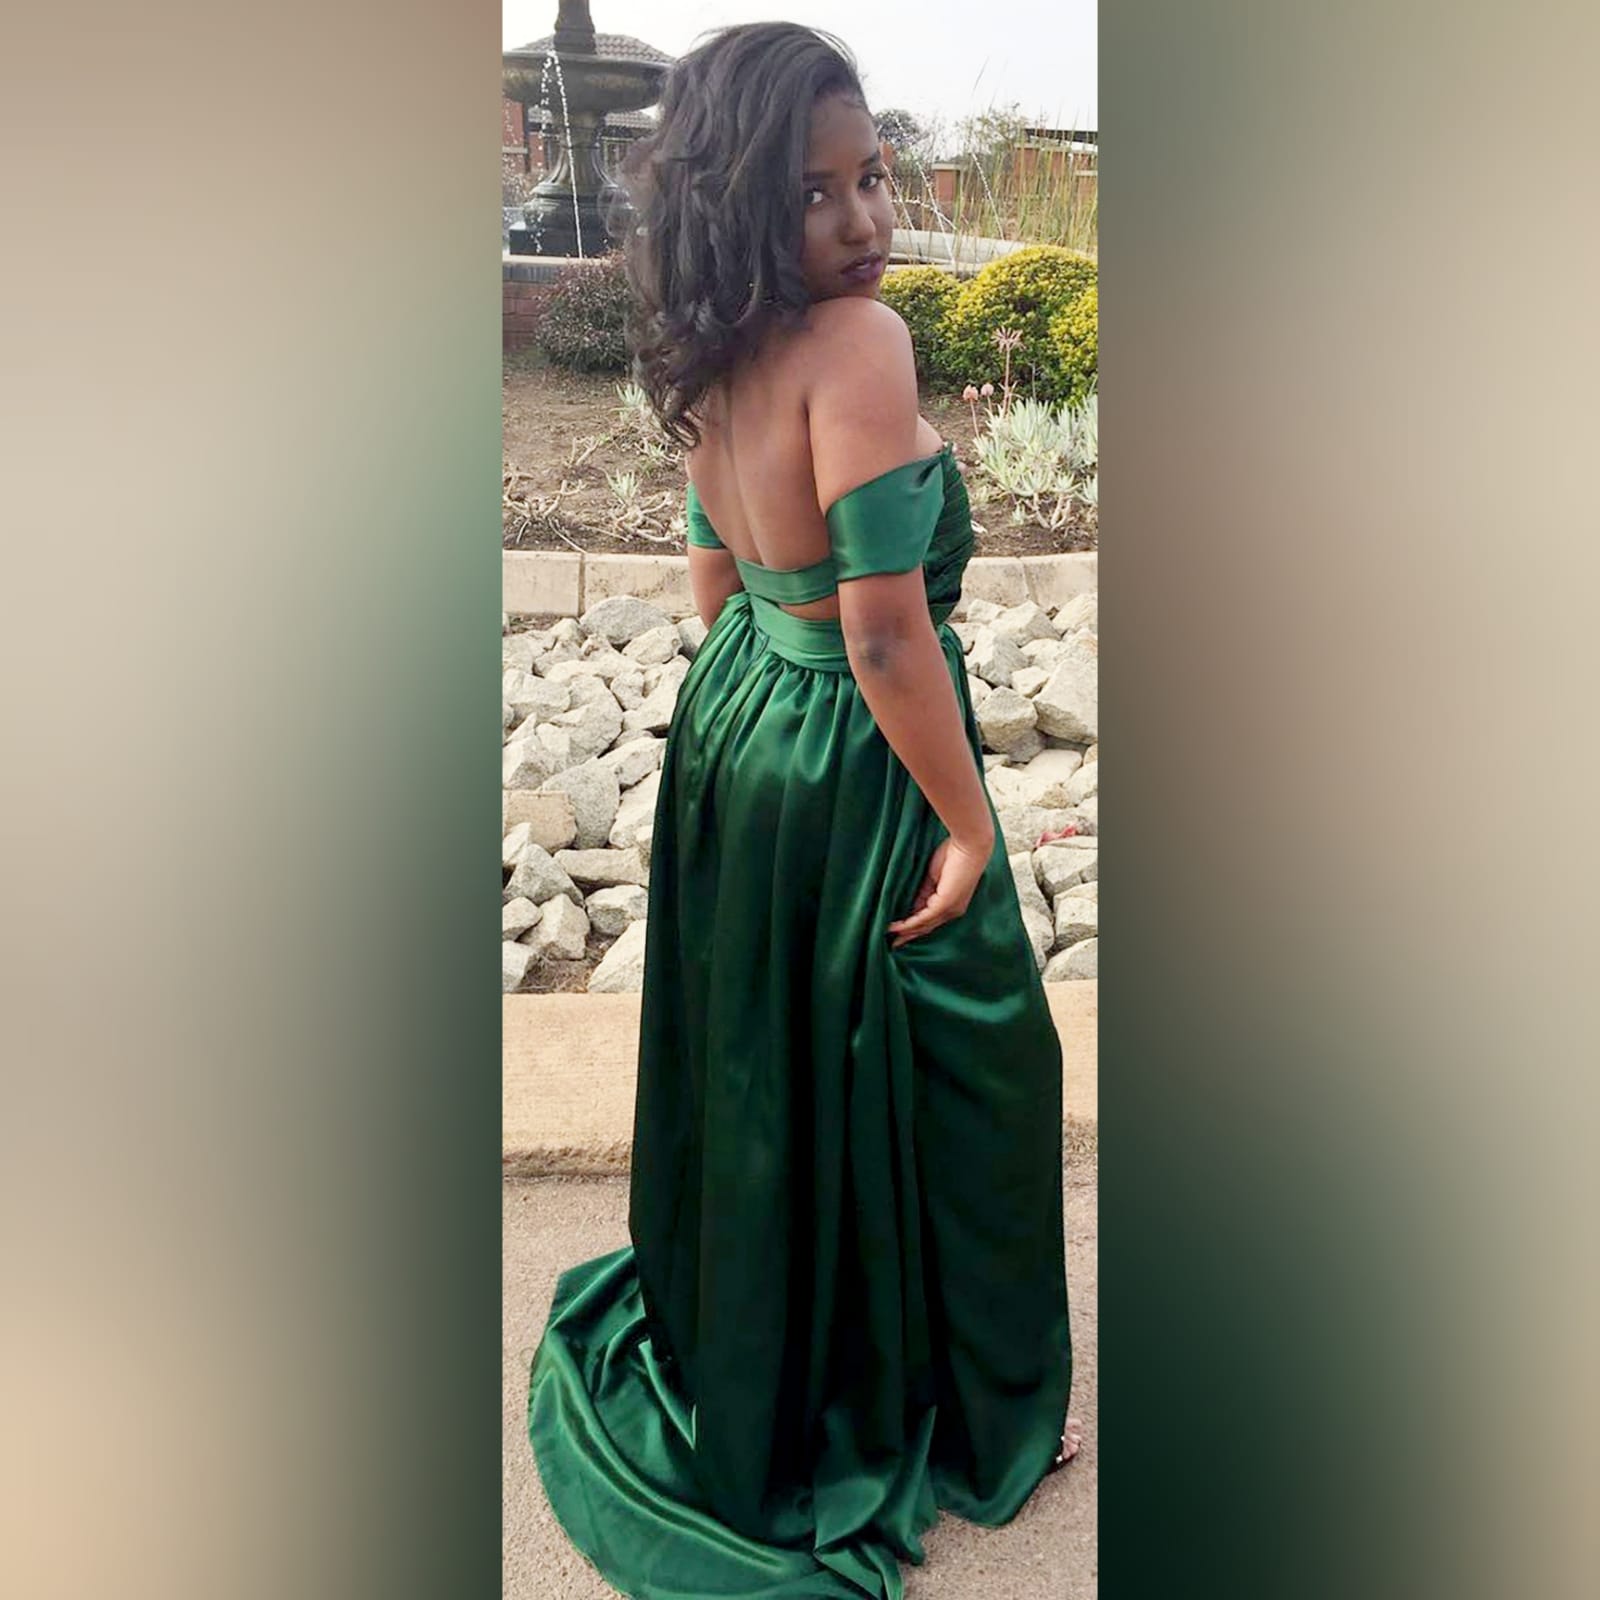 Emerald green satin flowy formal dress 7 emerald green satin off shoulder flowy formal dress, with a pleated bodice off shoulder short sleeves, naked back detailed with straps. A crossed slit and a small train.